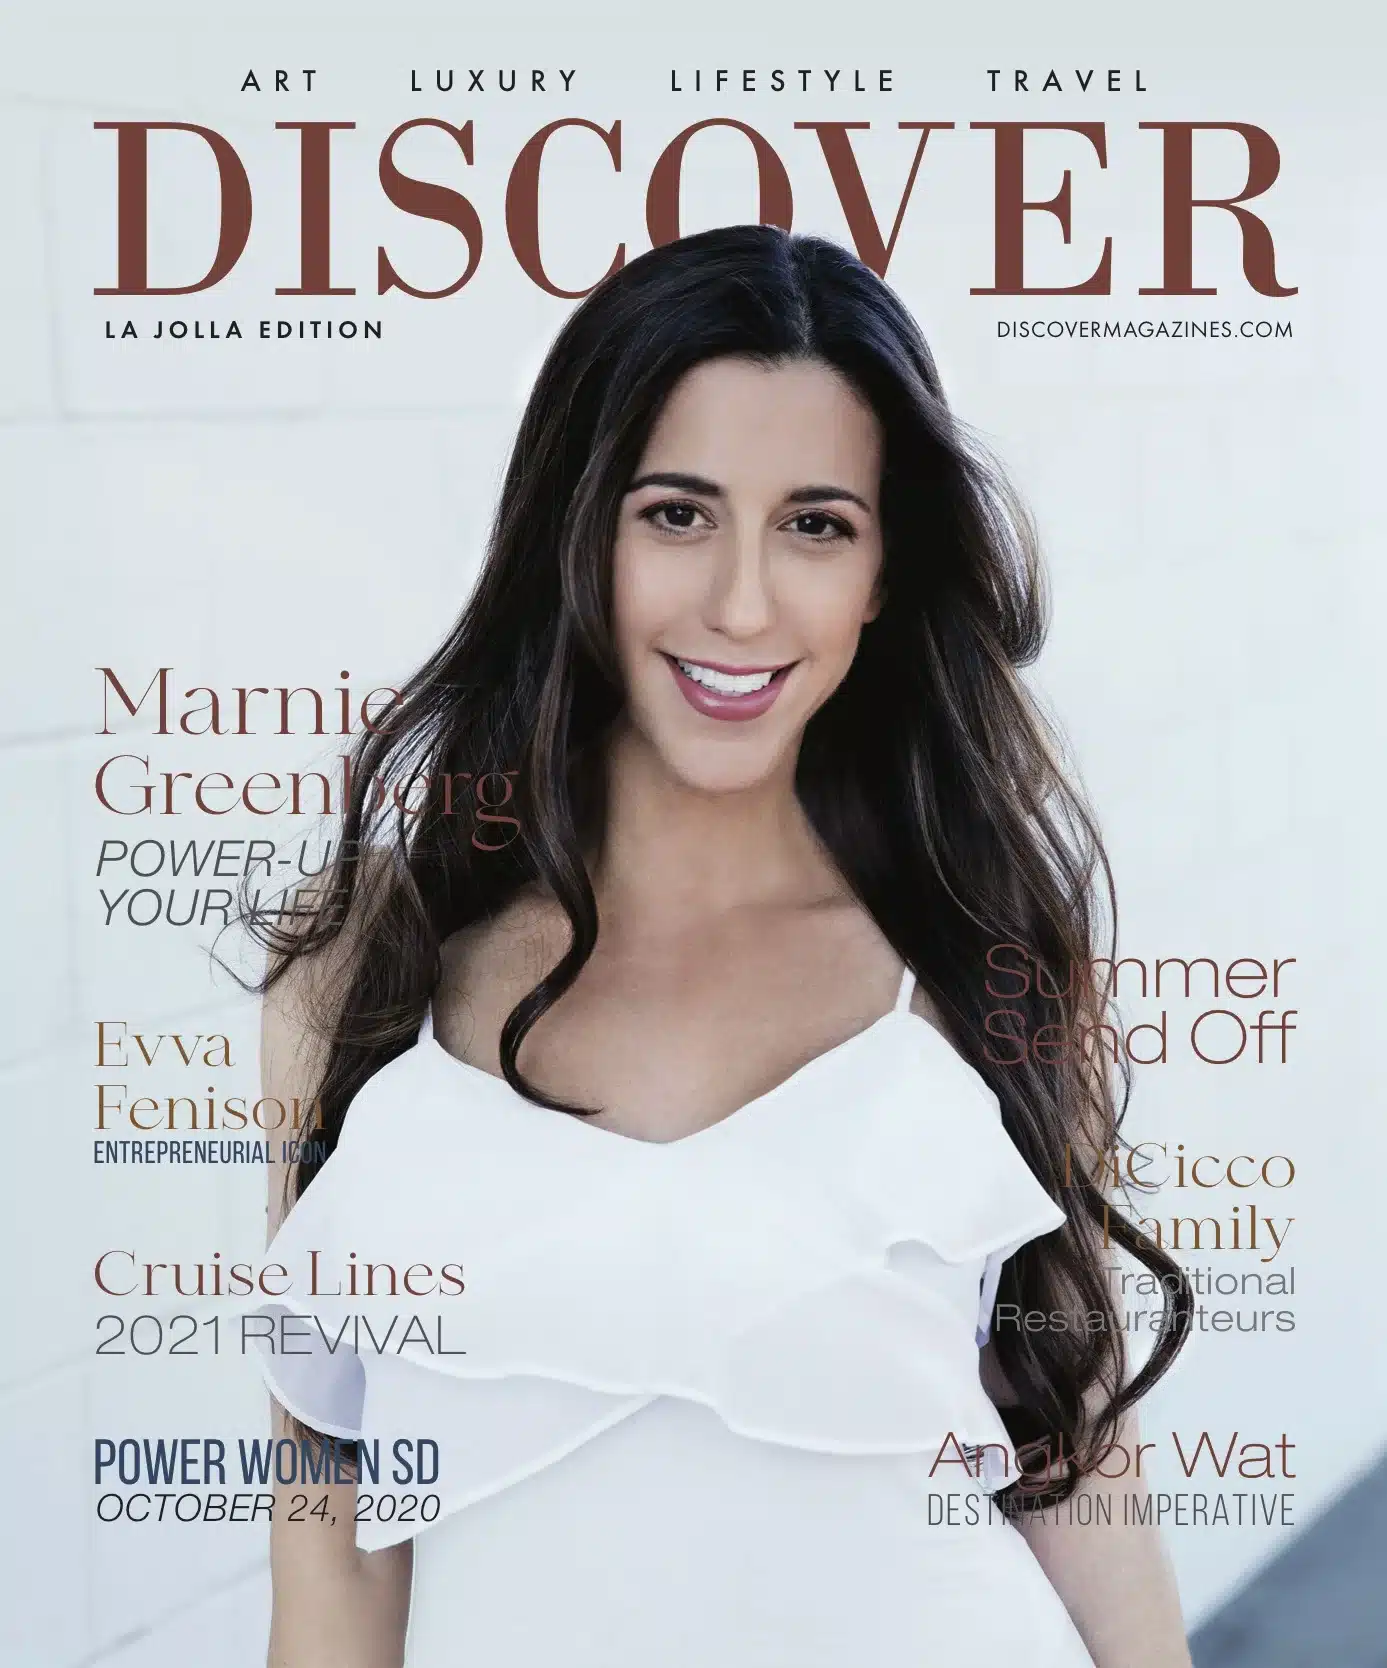 Marnie Greenberg on the cover of Discover magazine